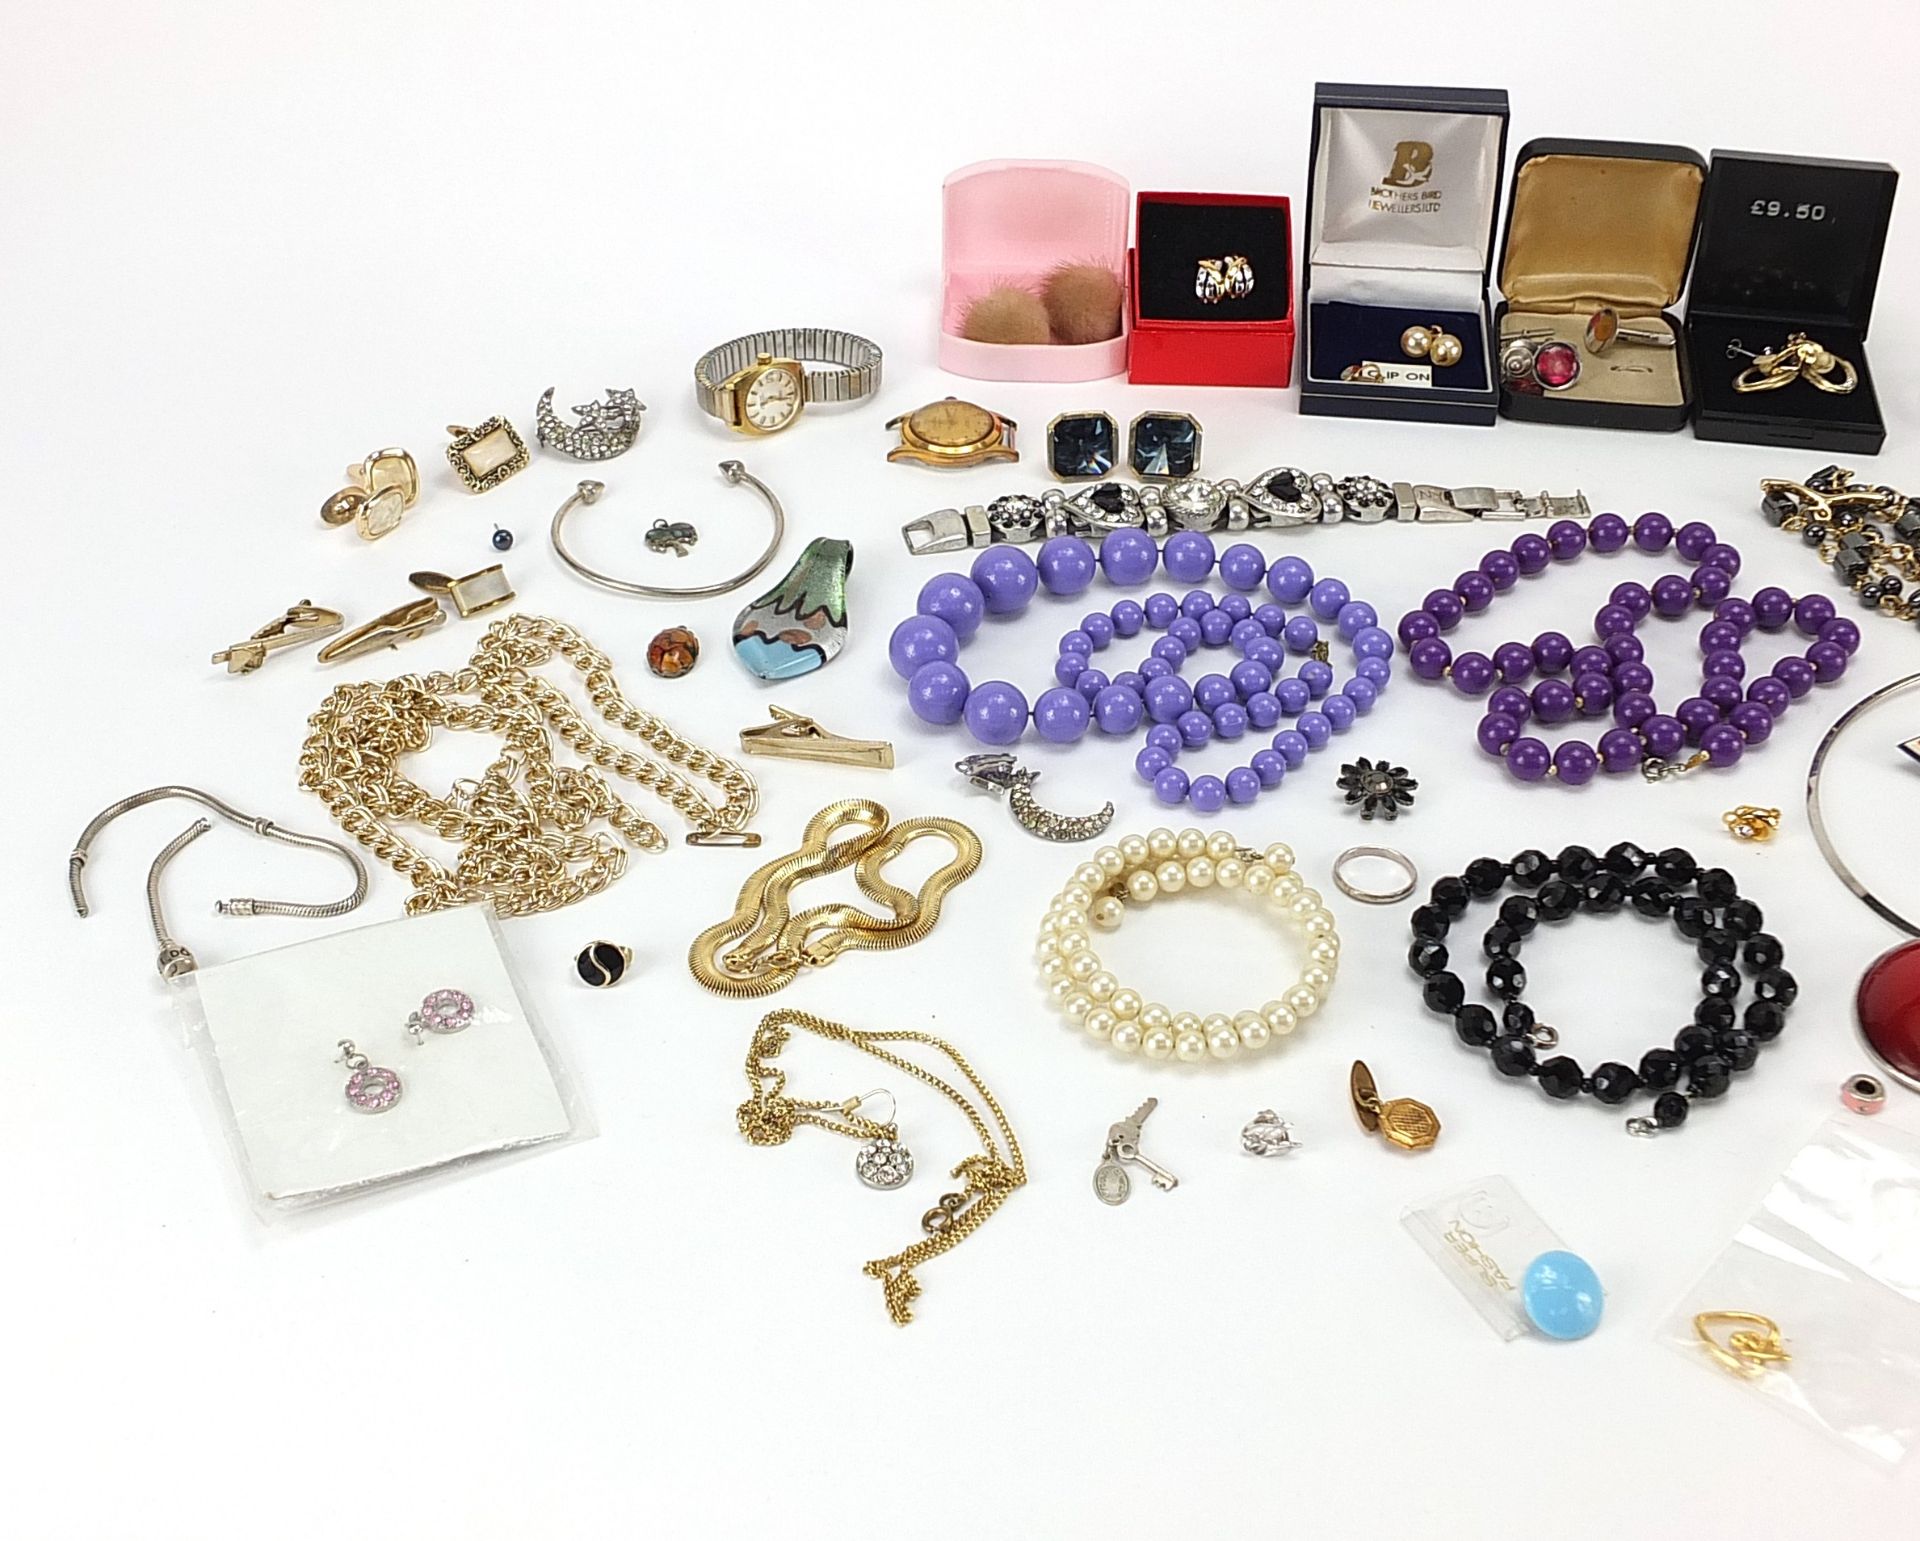 Vintage and later costume jewellery including necklaces, brooches, earrings and bracelets - Image 2 of 3